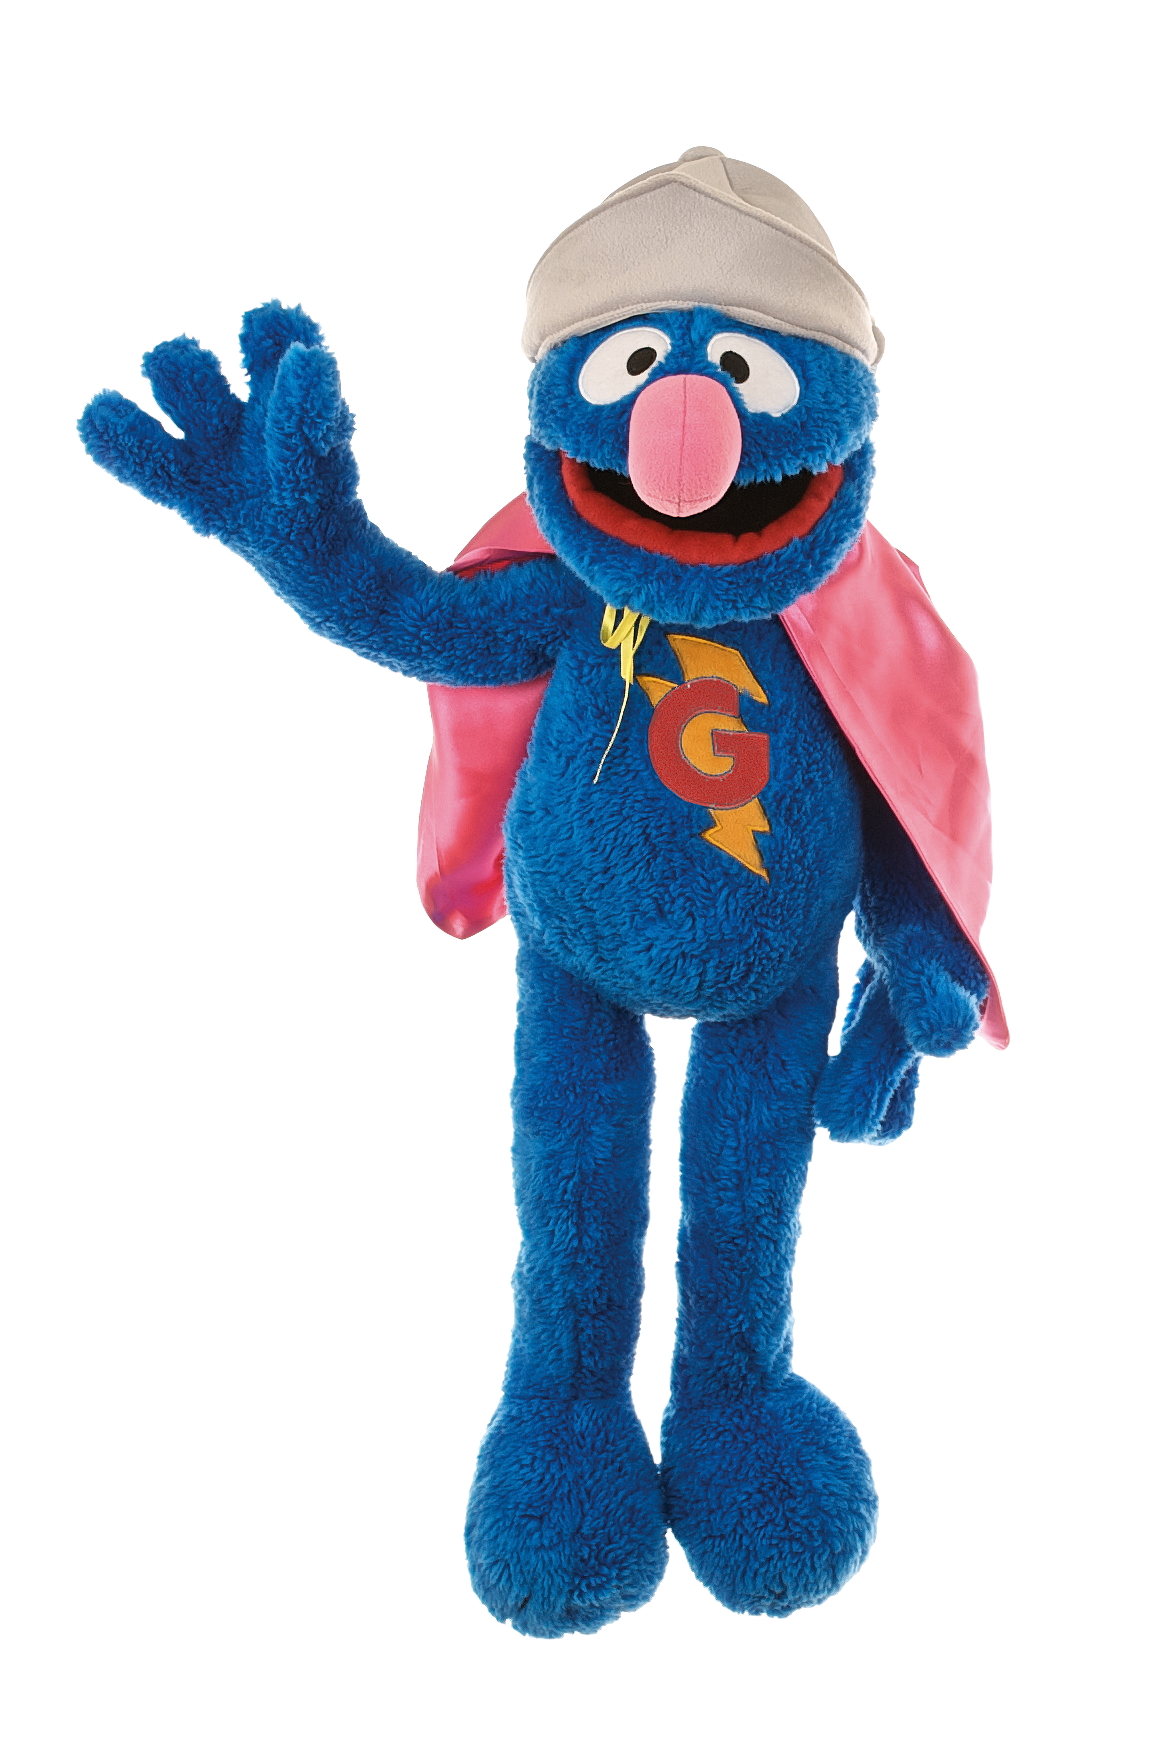 Pbs Kids Ready To Learn Super Grover